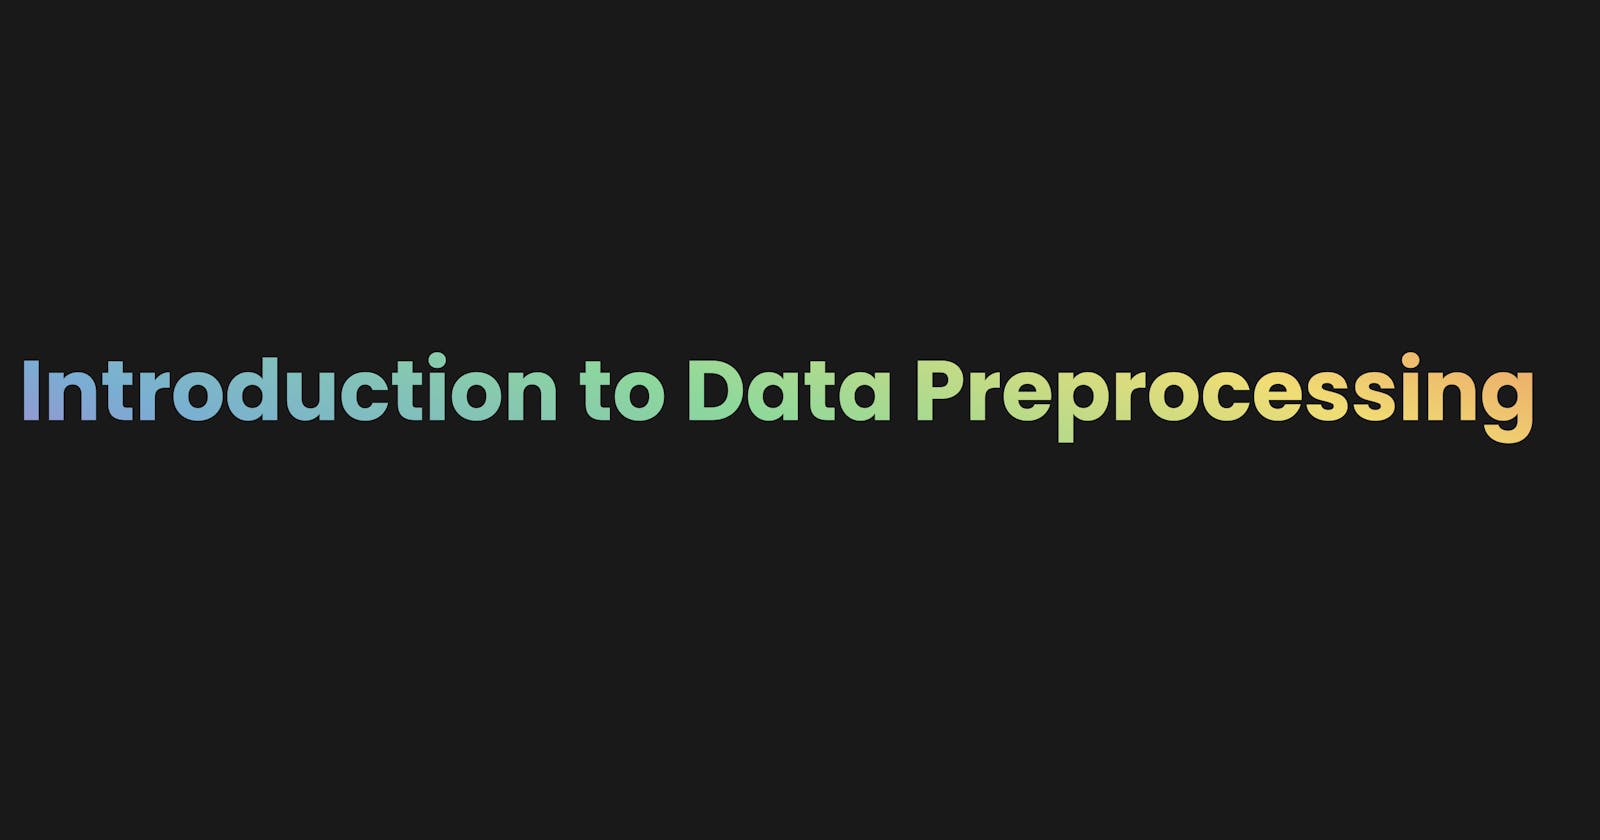 Introduction to Data Preprocessing